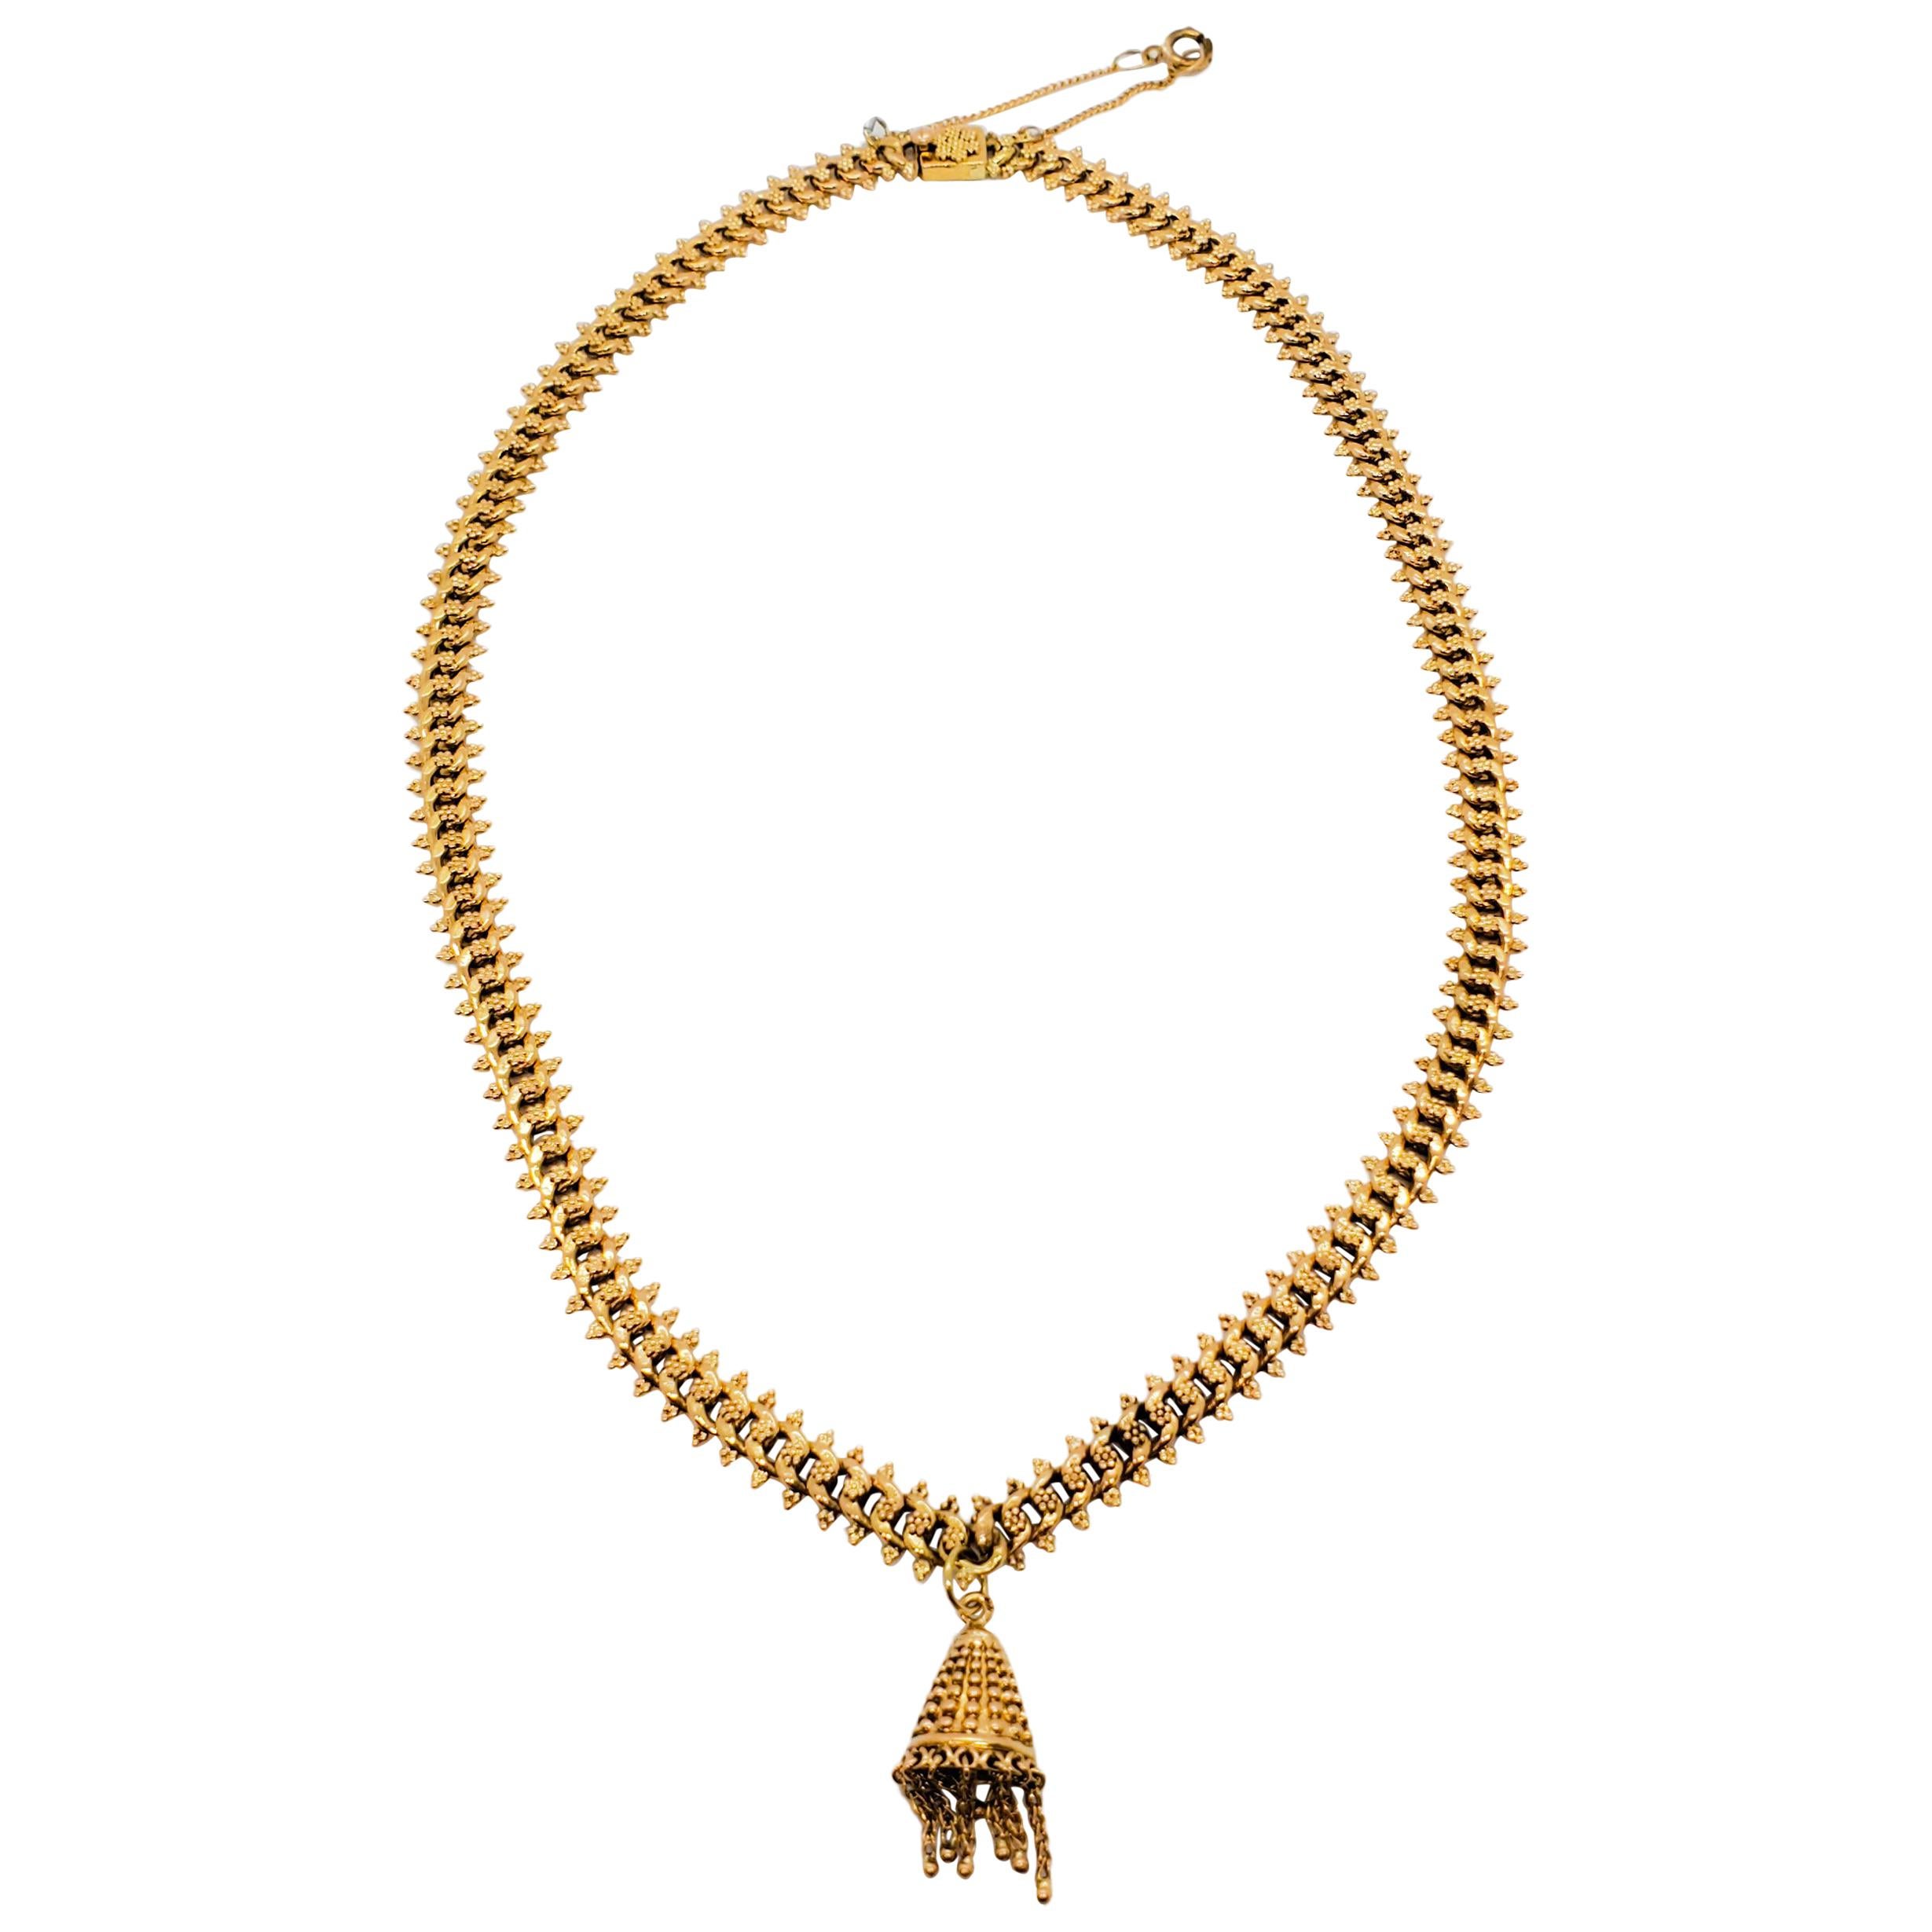 Estate 18 Karat Yellow Gold Necklace with a Tassel Pendant